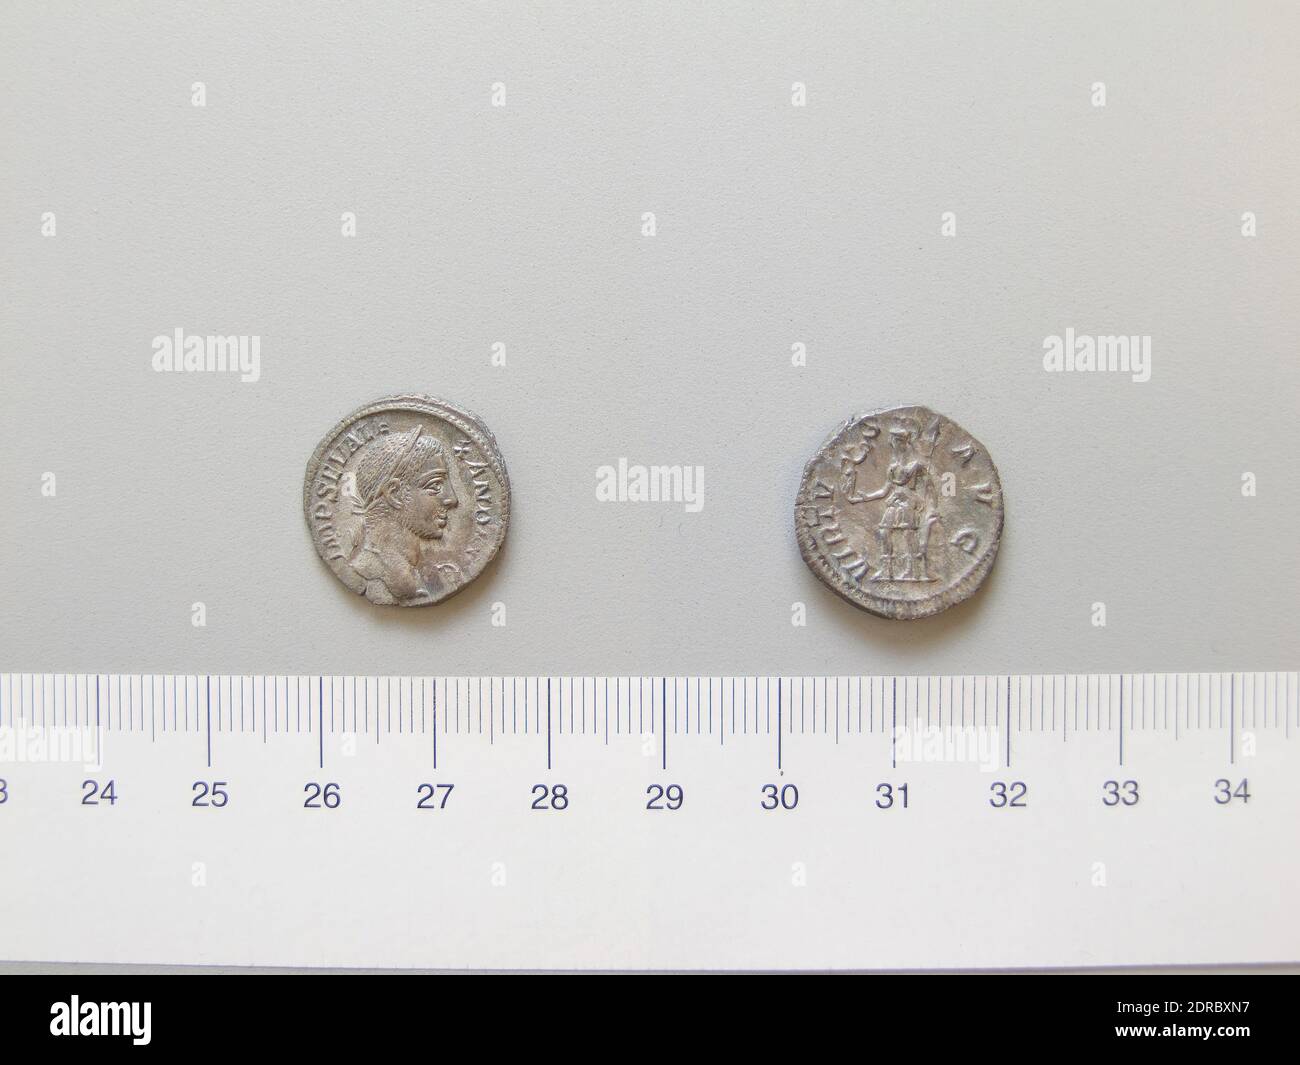 Ruler: Severus Alexander, Emperor of Rome, A.D. 208–235, ruled A.D. 222–35, Mint: Rome, Denarius of Severus Alexander, Emperor of Rome from Rome, 228–31, Silver, 1.76 g, 6:00, 19.5 mm, Made in Rome, Italy, Roman, 3rd century A.D., Numismatics Stock Photo